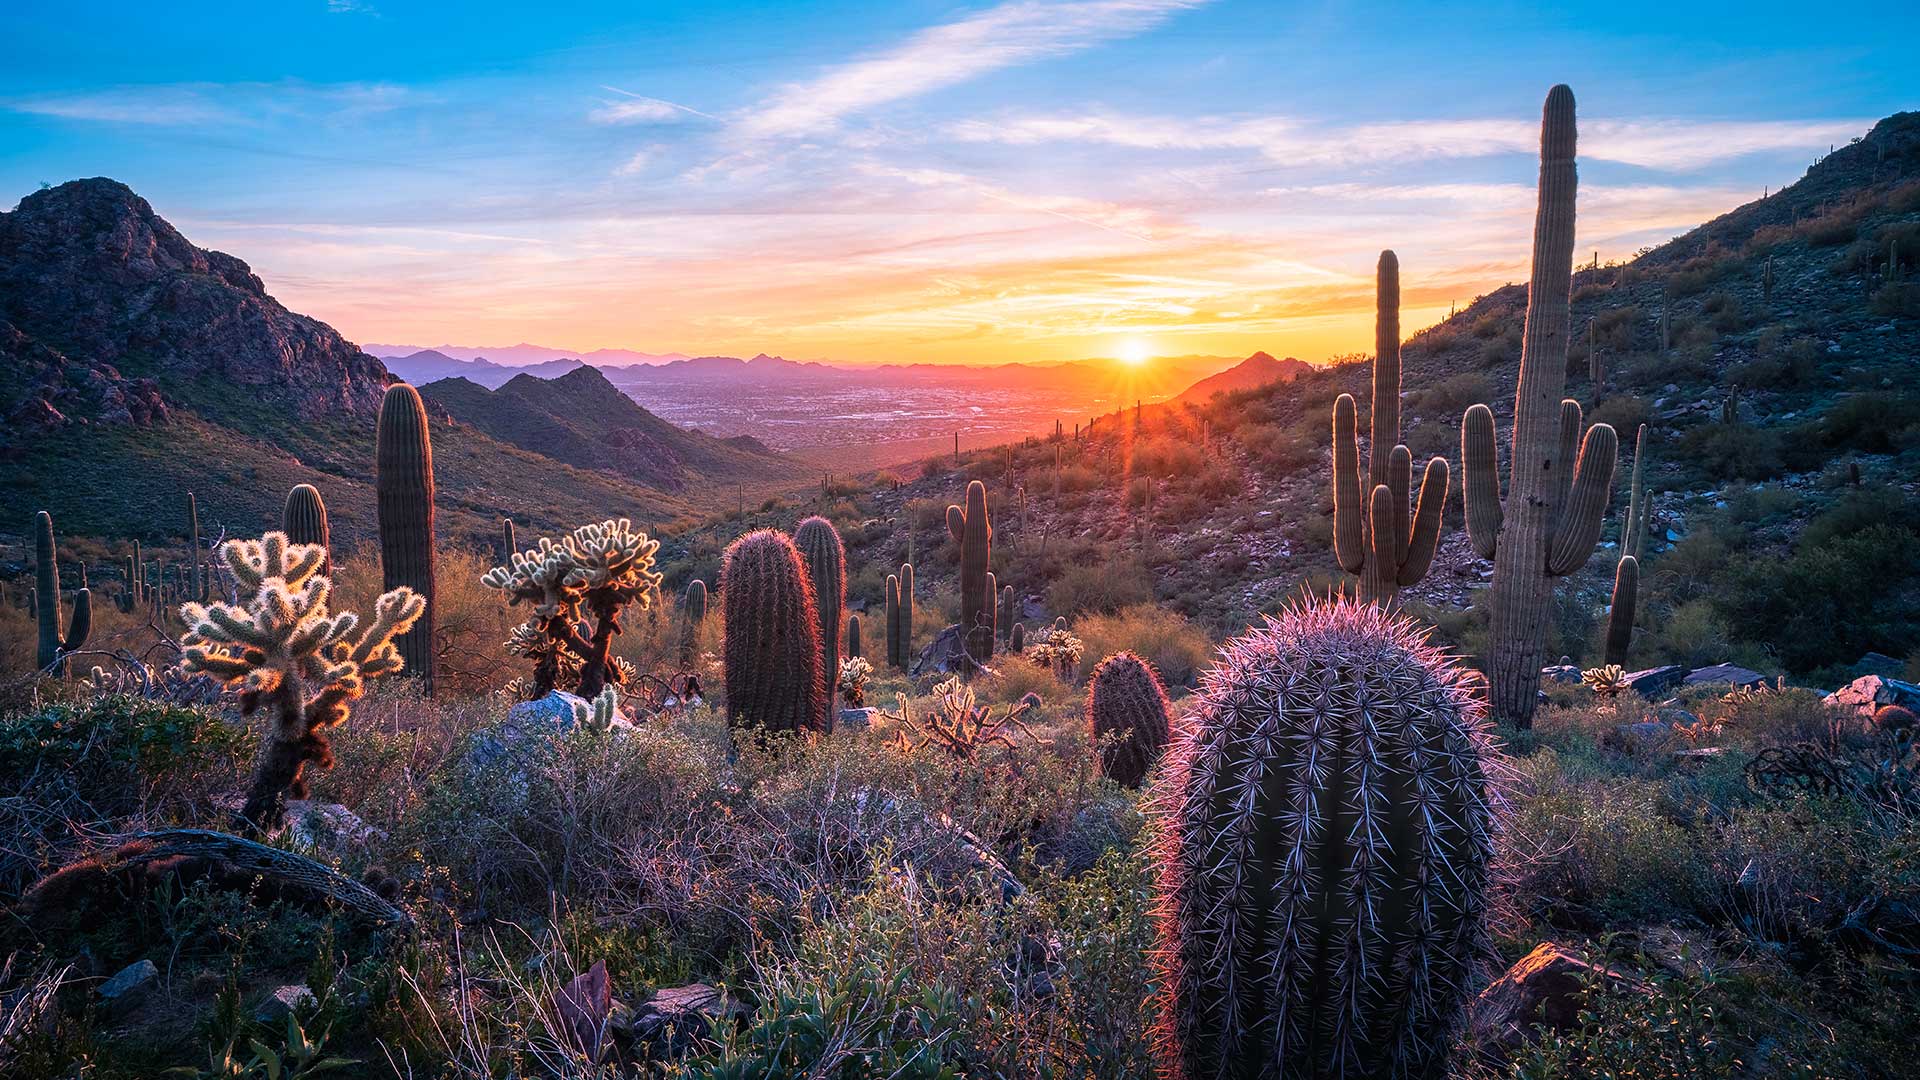 Sunset over a desert landscape with scattered cacti including tall saguaro and rounded barrel cacti, foreground illuminated, mountains and colorful sky in the background.